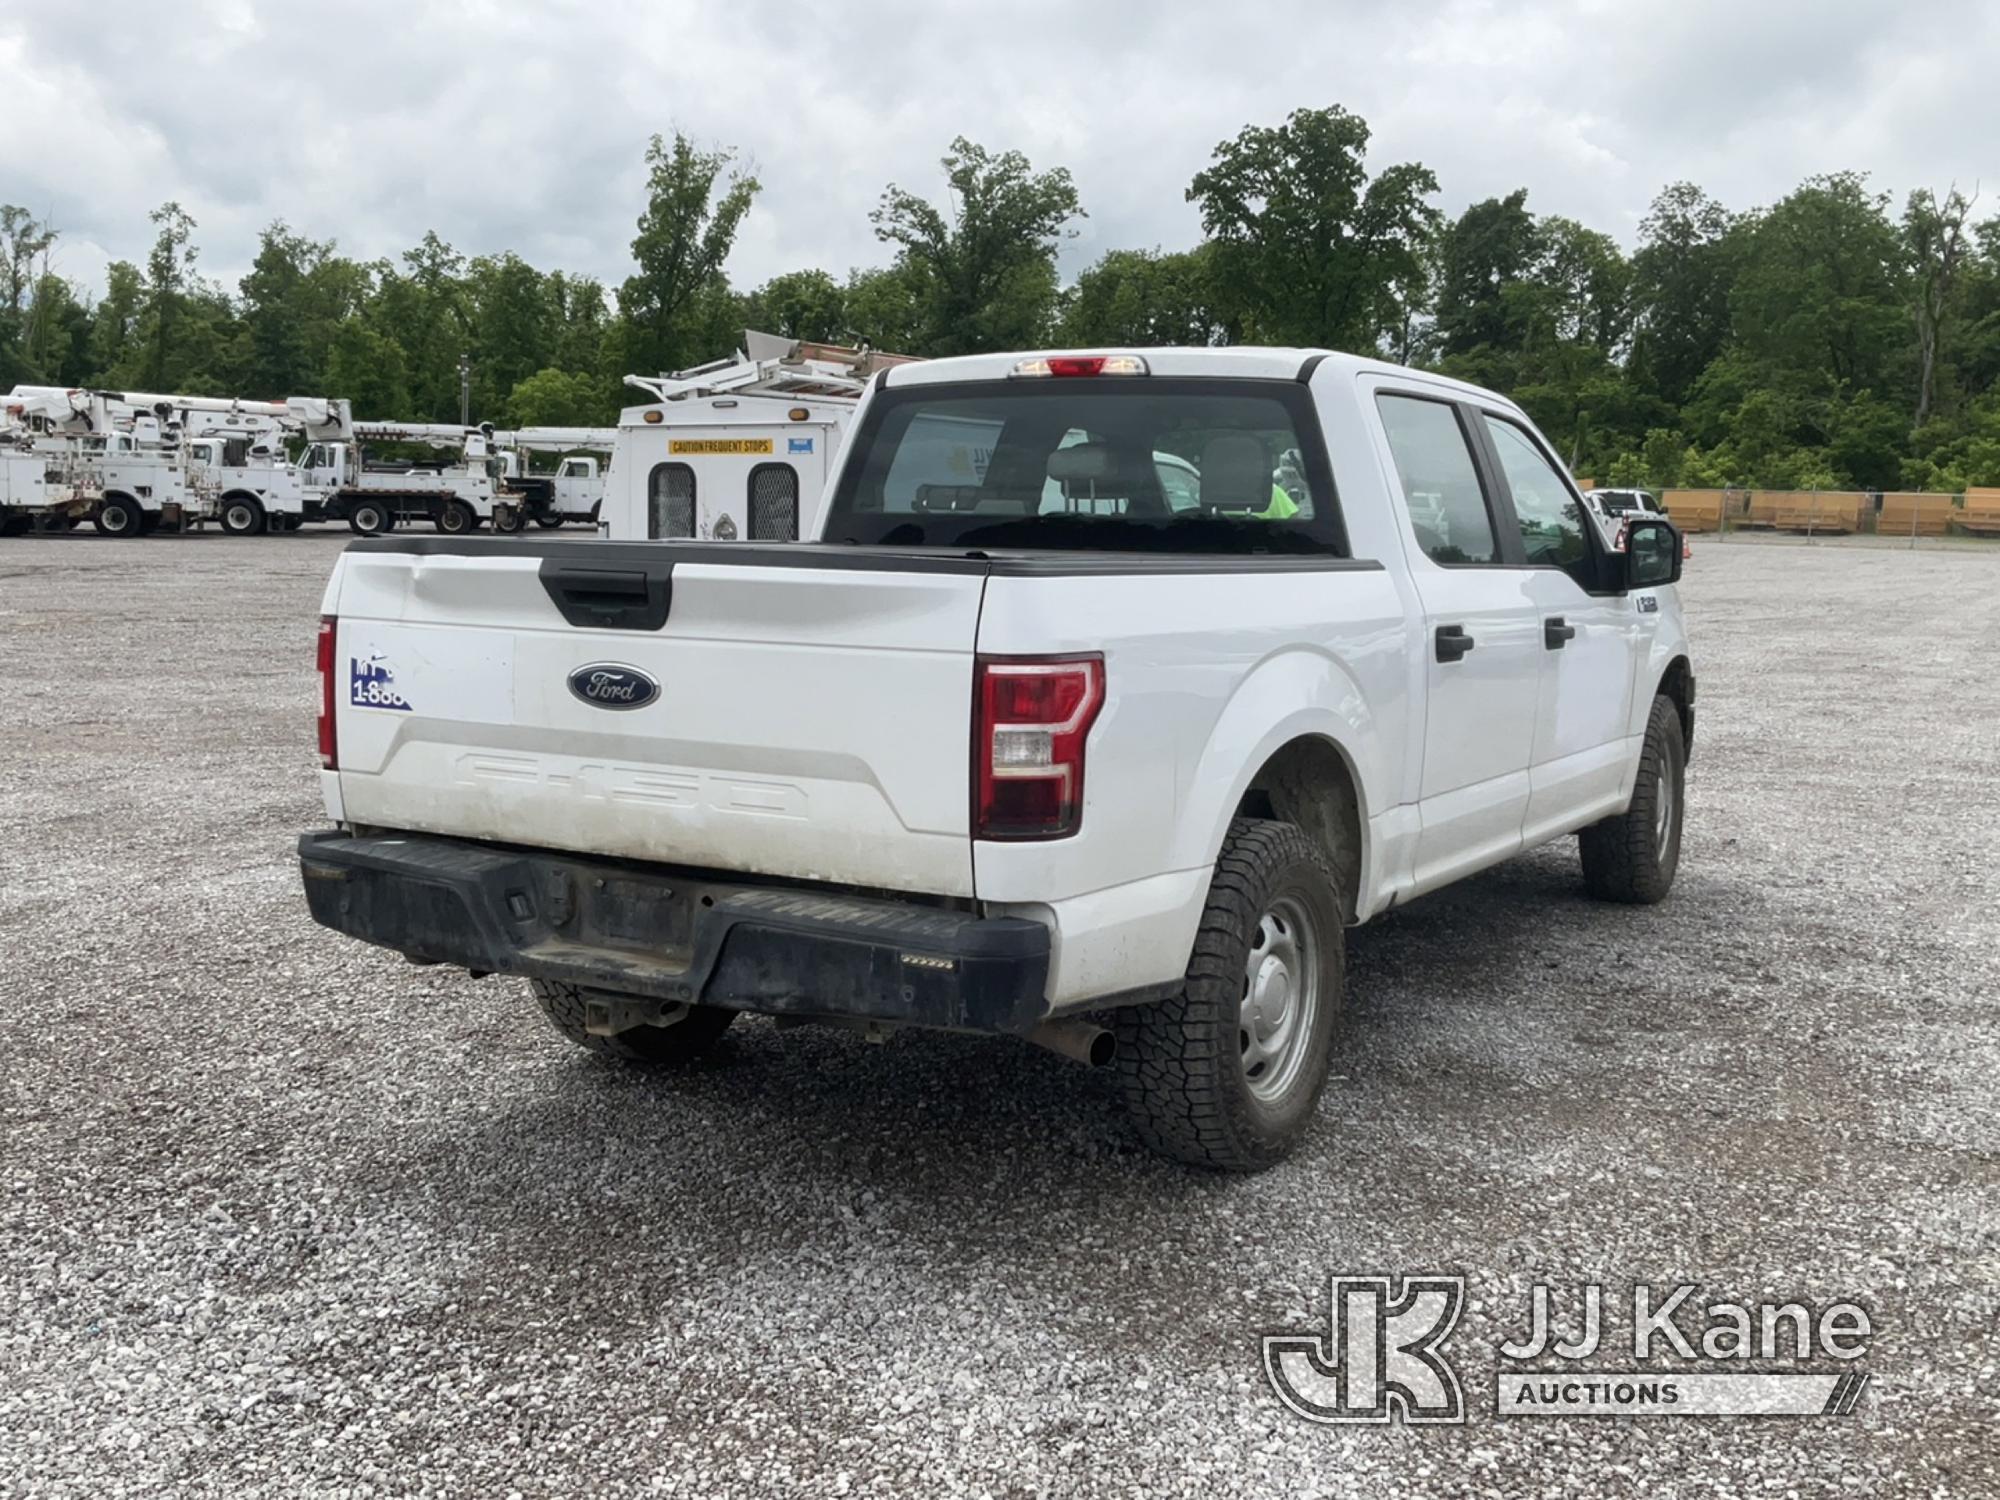 (Verona, KY) 2018 Ford F150 Crew-Cab Pickup Truck Runs & Moves) (Body Damage, Seller Note: Needs New